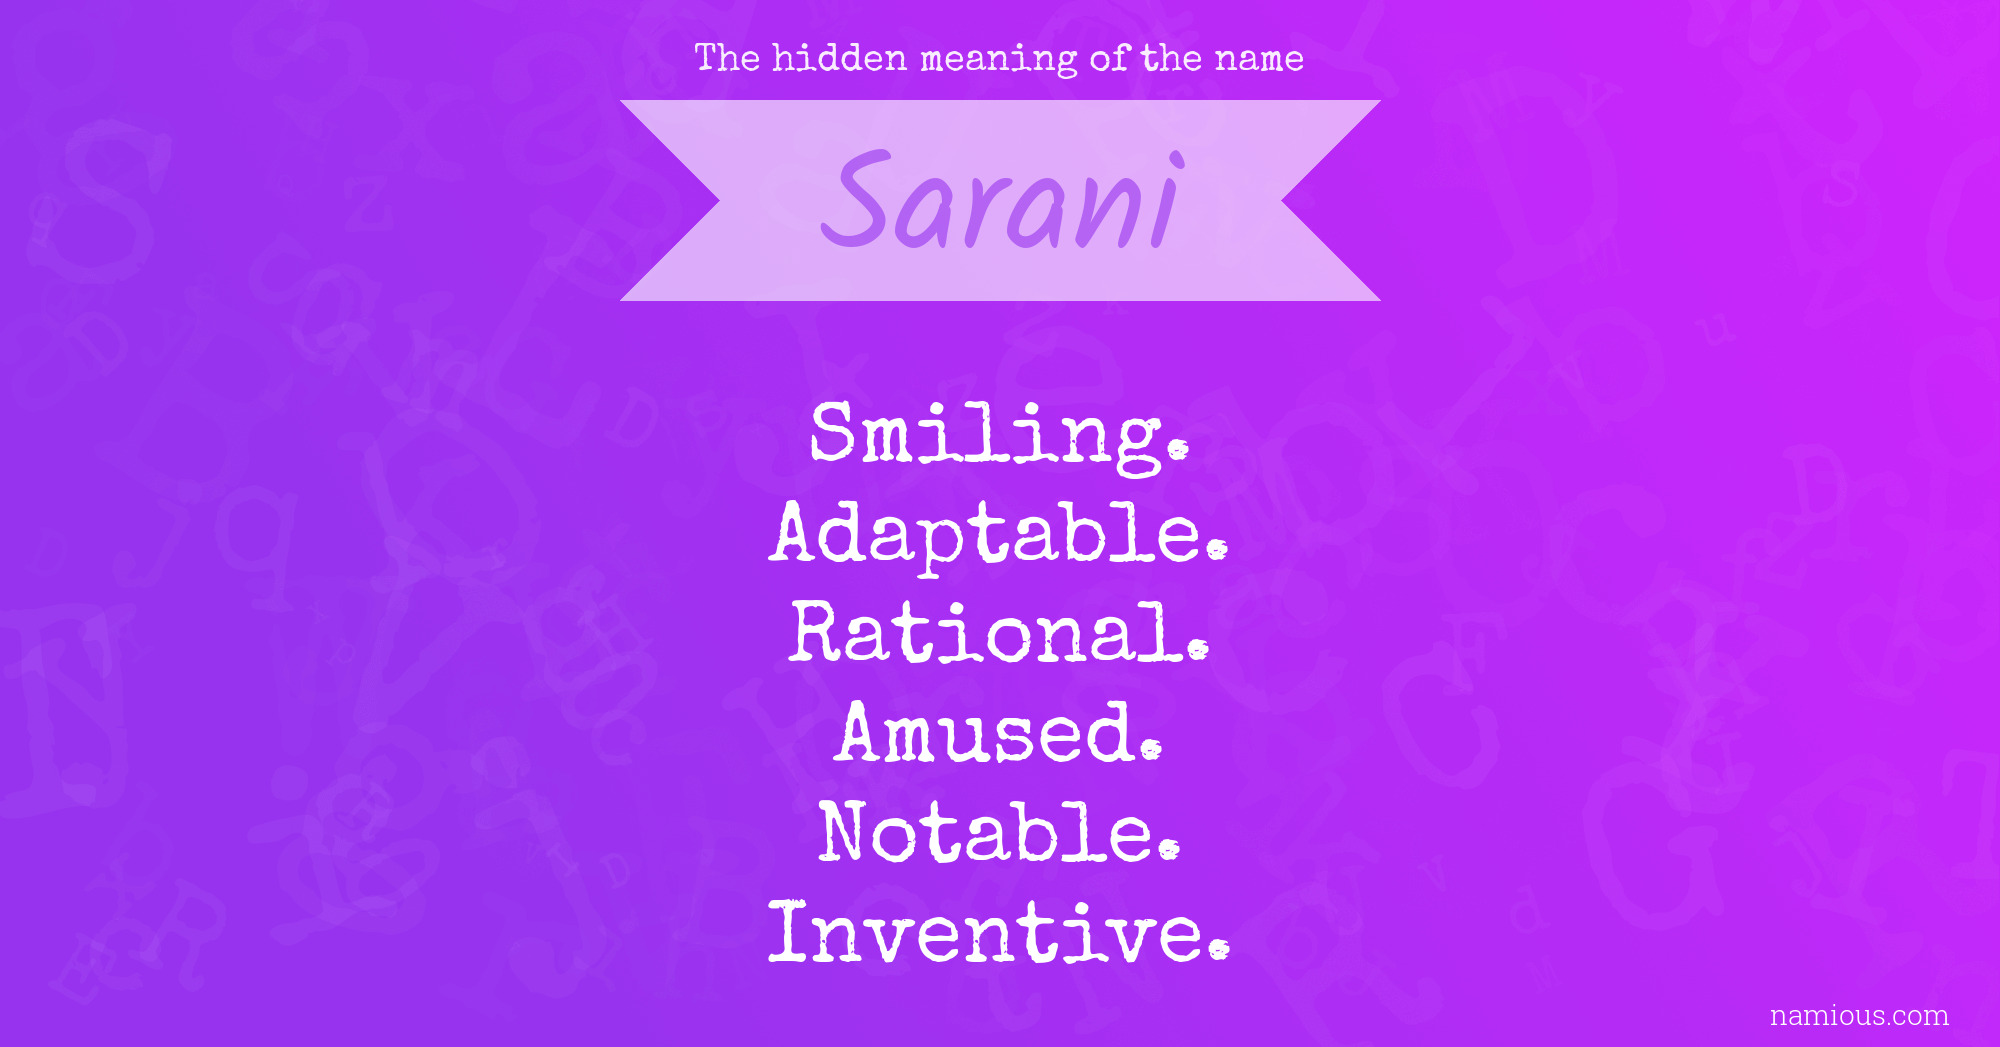 The hidden meaning of the name Sarani